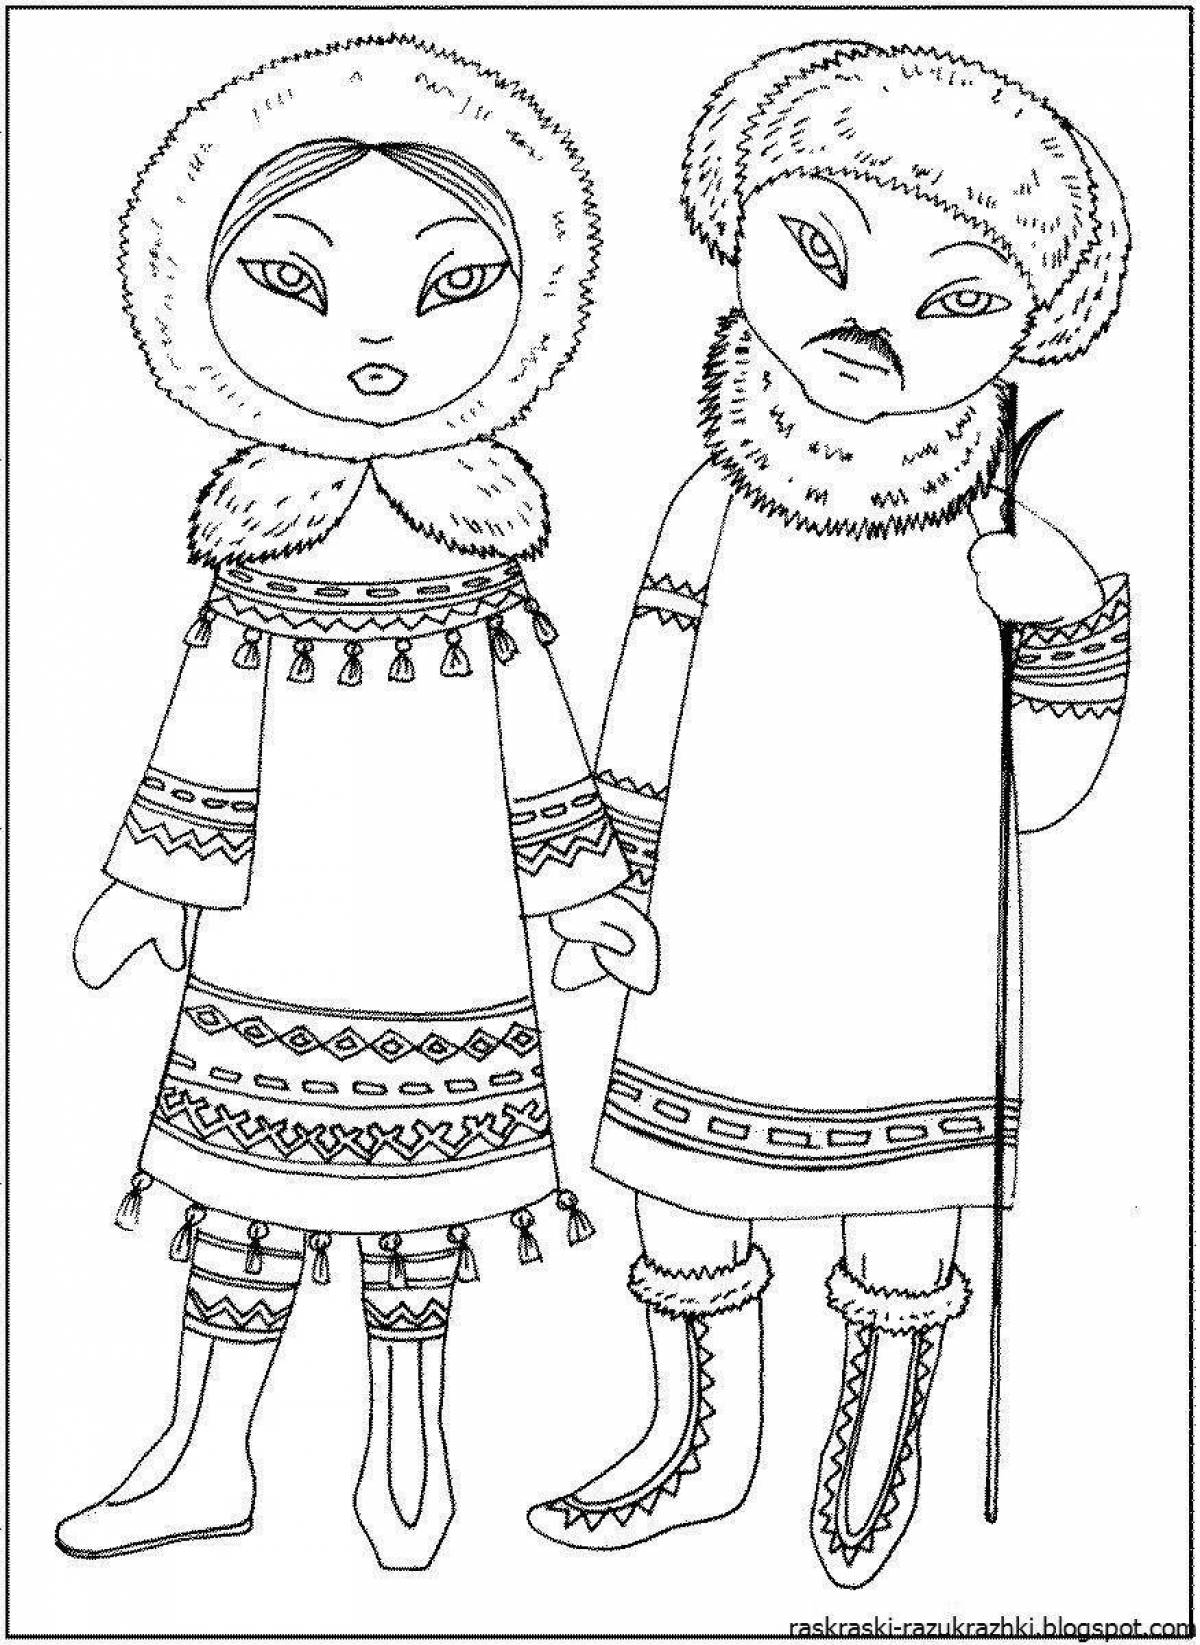 Coloring book bewitching Khanty and Mansi